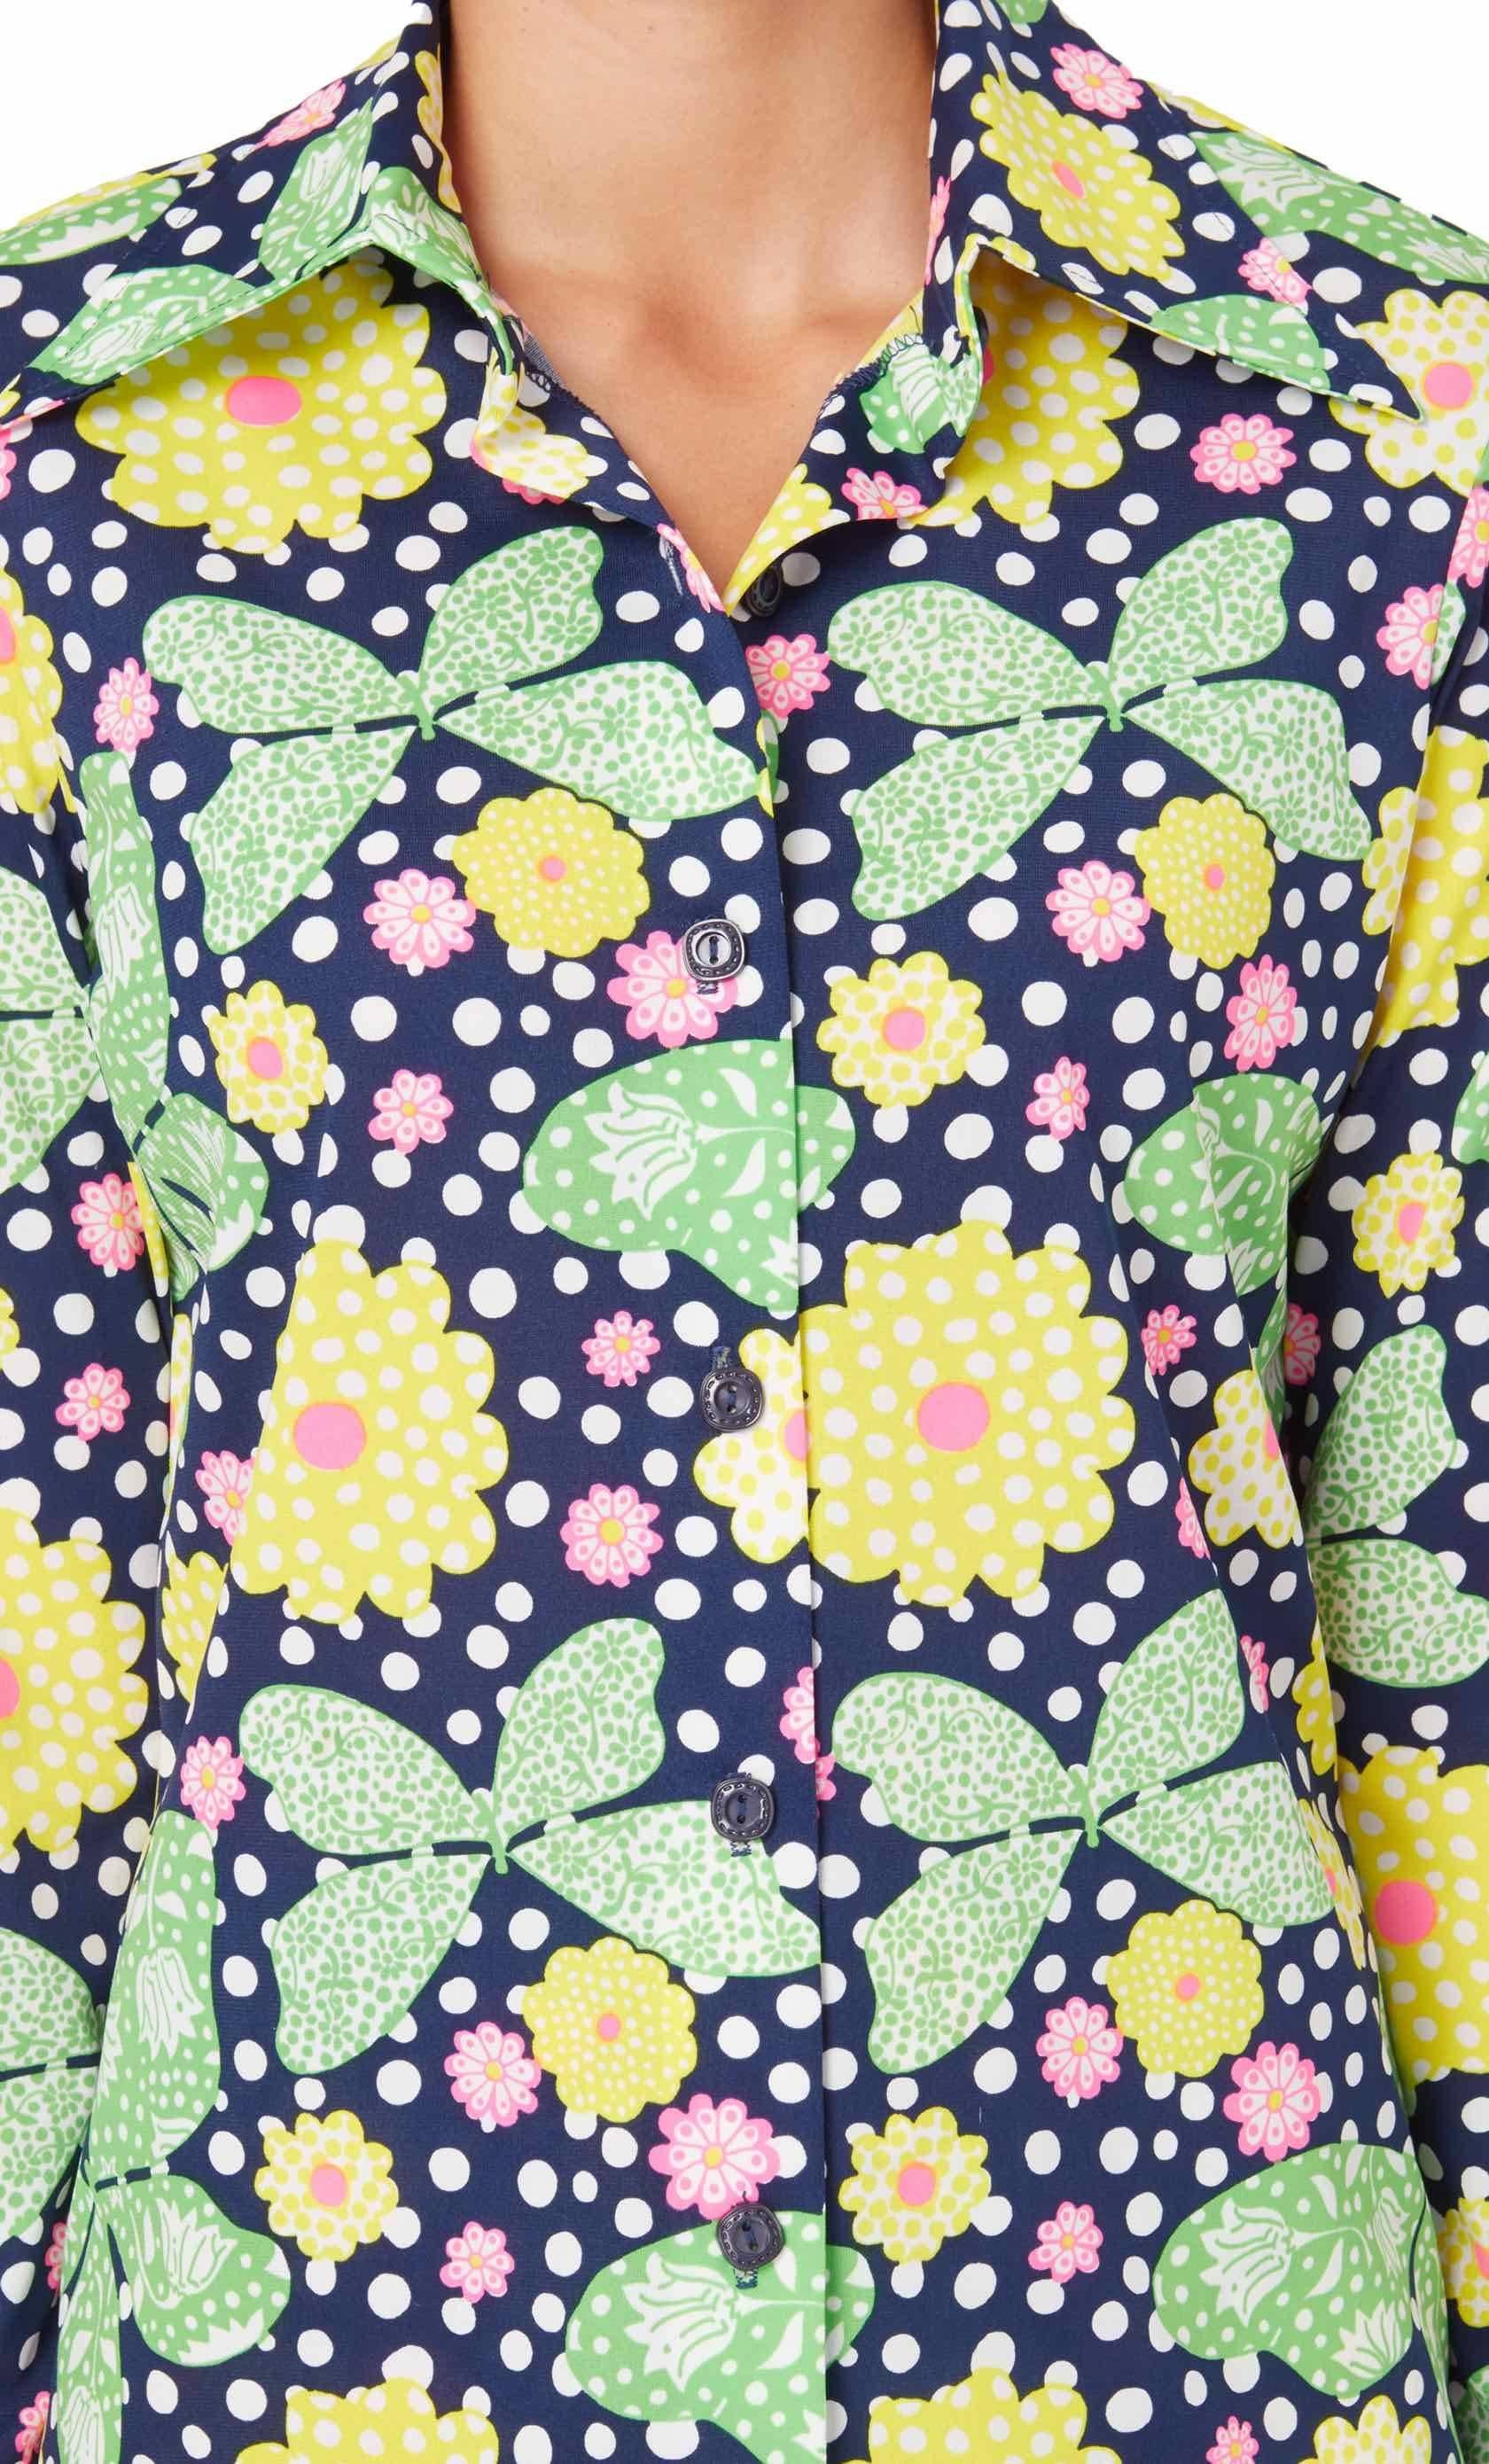 Women's Lilly Pulitzer, floral ensemble, circa 1968 For Sale